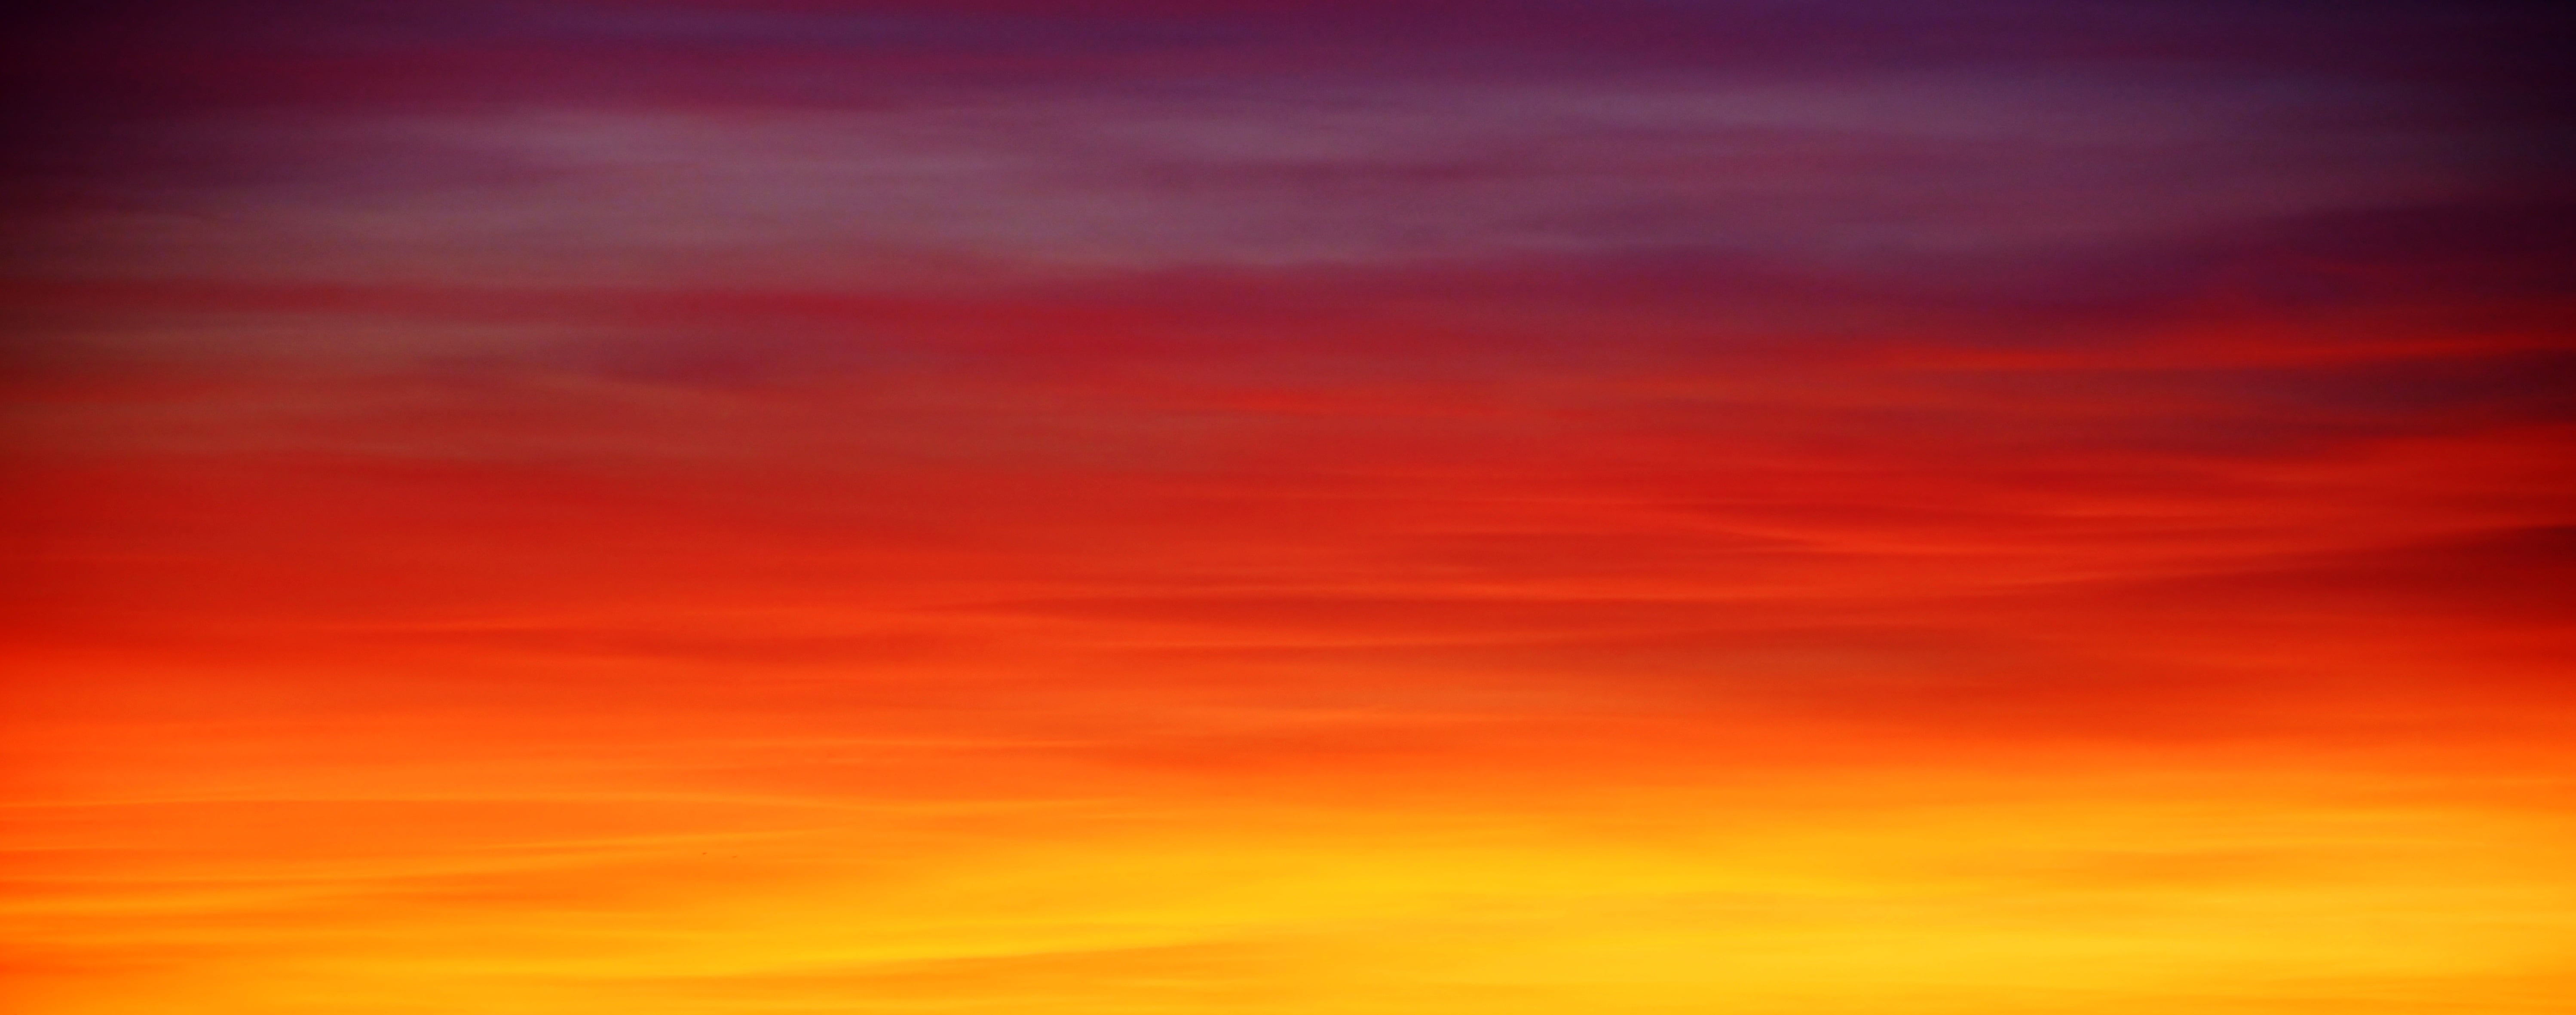 red and yellow clouds, sky, bright, gradient, sunset, nature